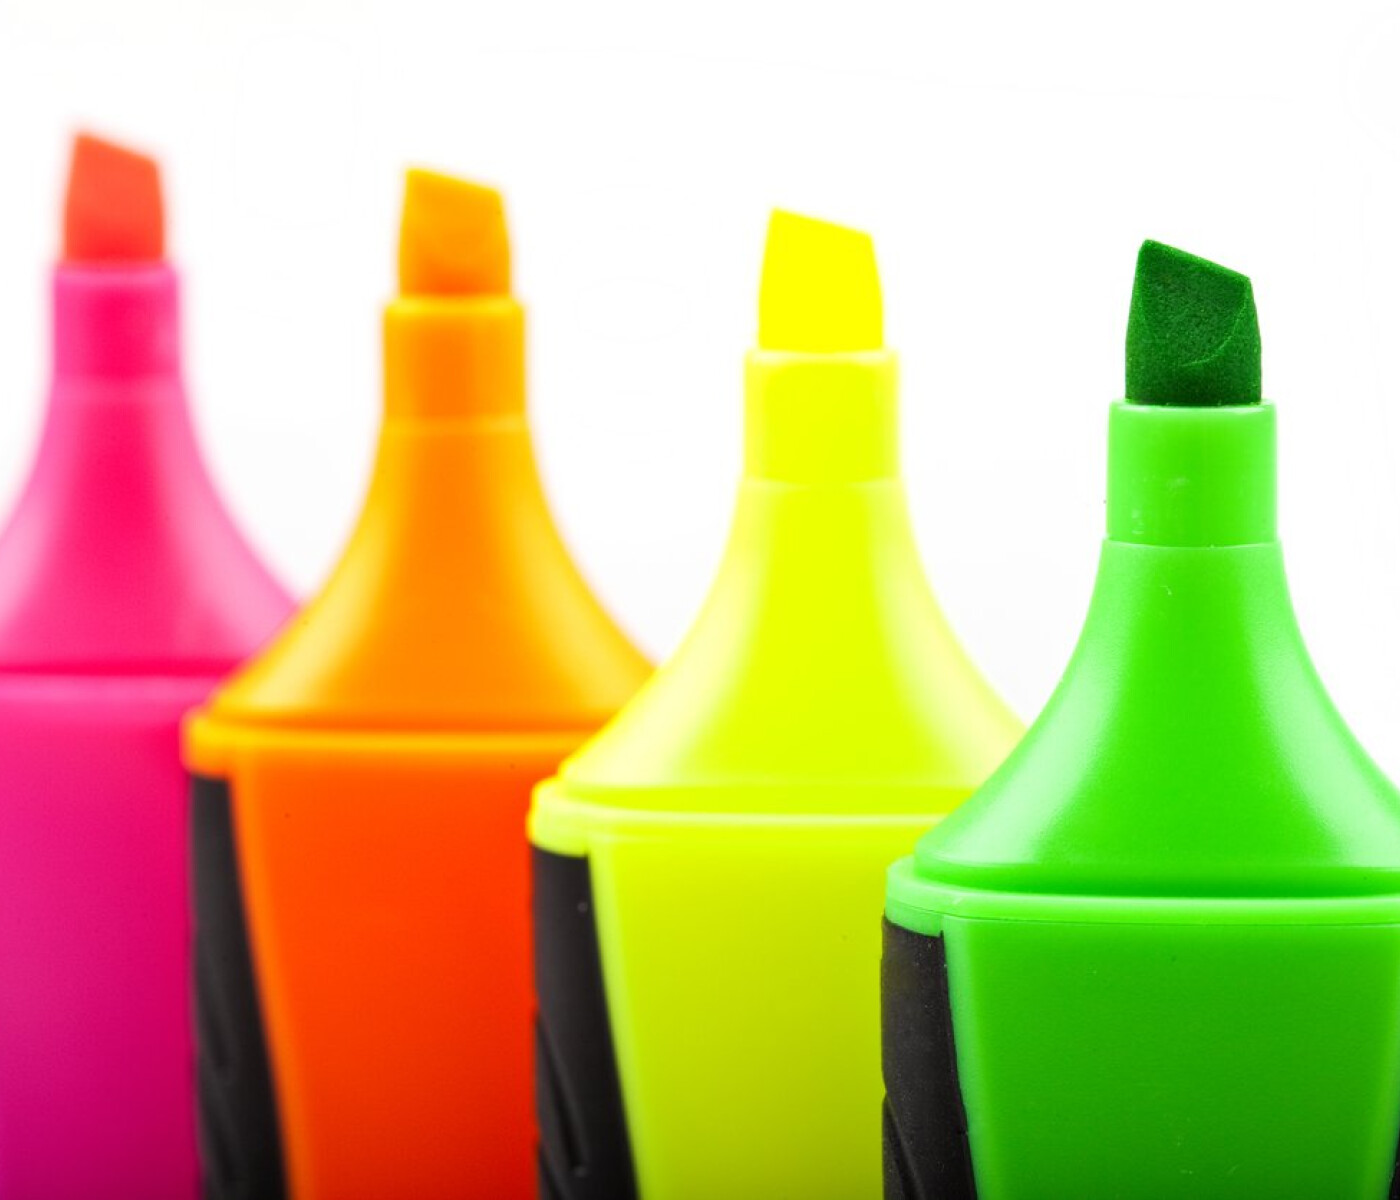 Photo of highlighter pens.